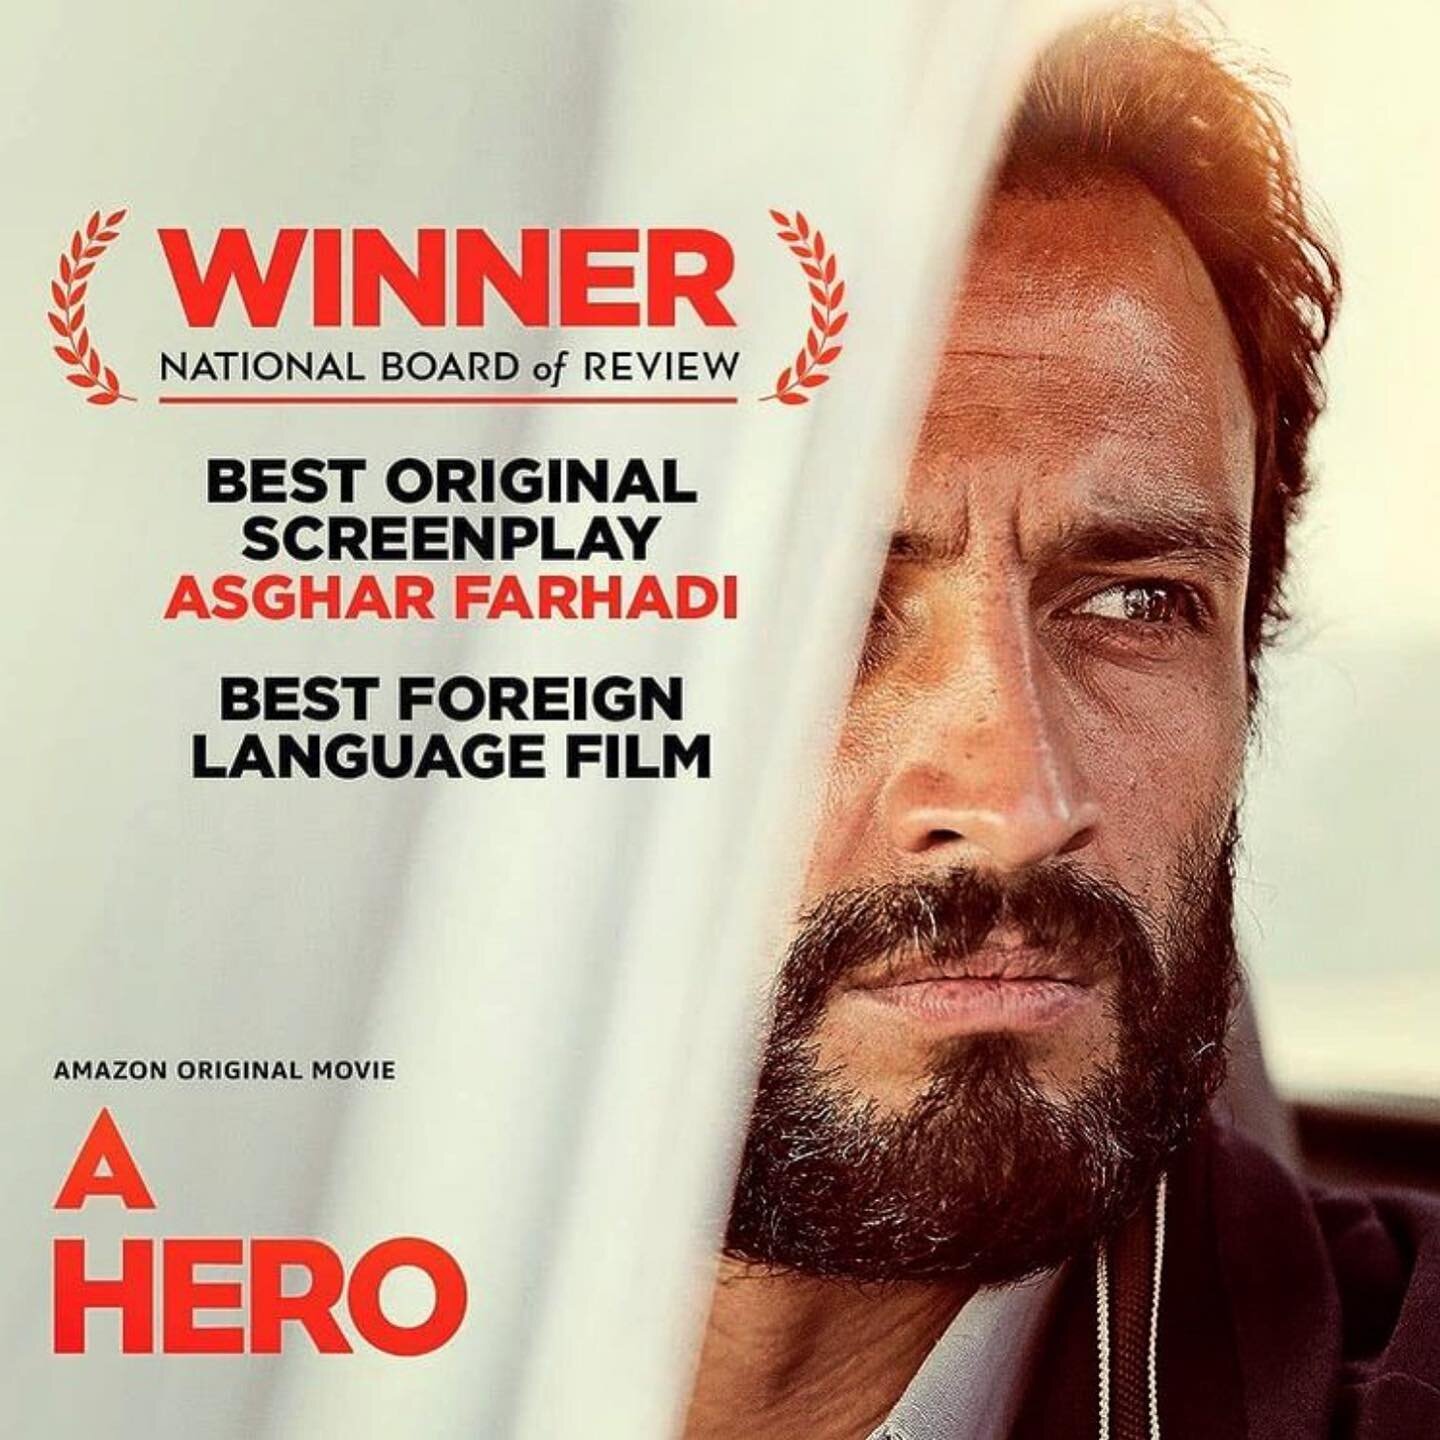 ❤️🎬⭐️ A joy to record the Audio Description Narration for the film, A Hero ~ a spellbinding morality drama. Multiple nominations for Best Foreign Language Film 2022, now playing in theaters and streaming on @amazonprimevideo from Oscar winning Irani